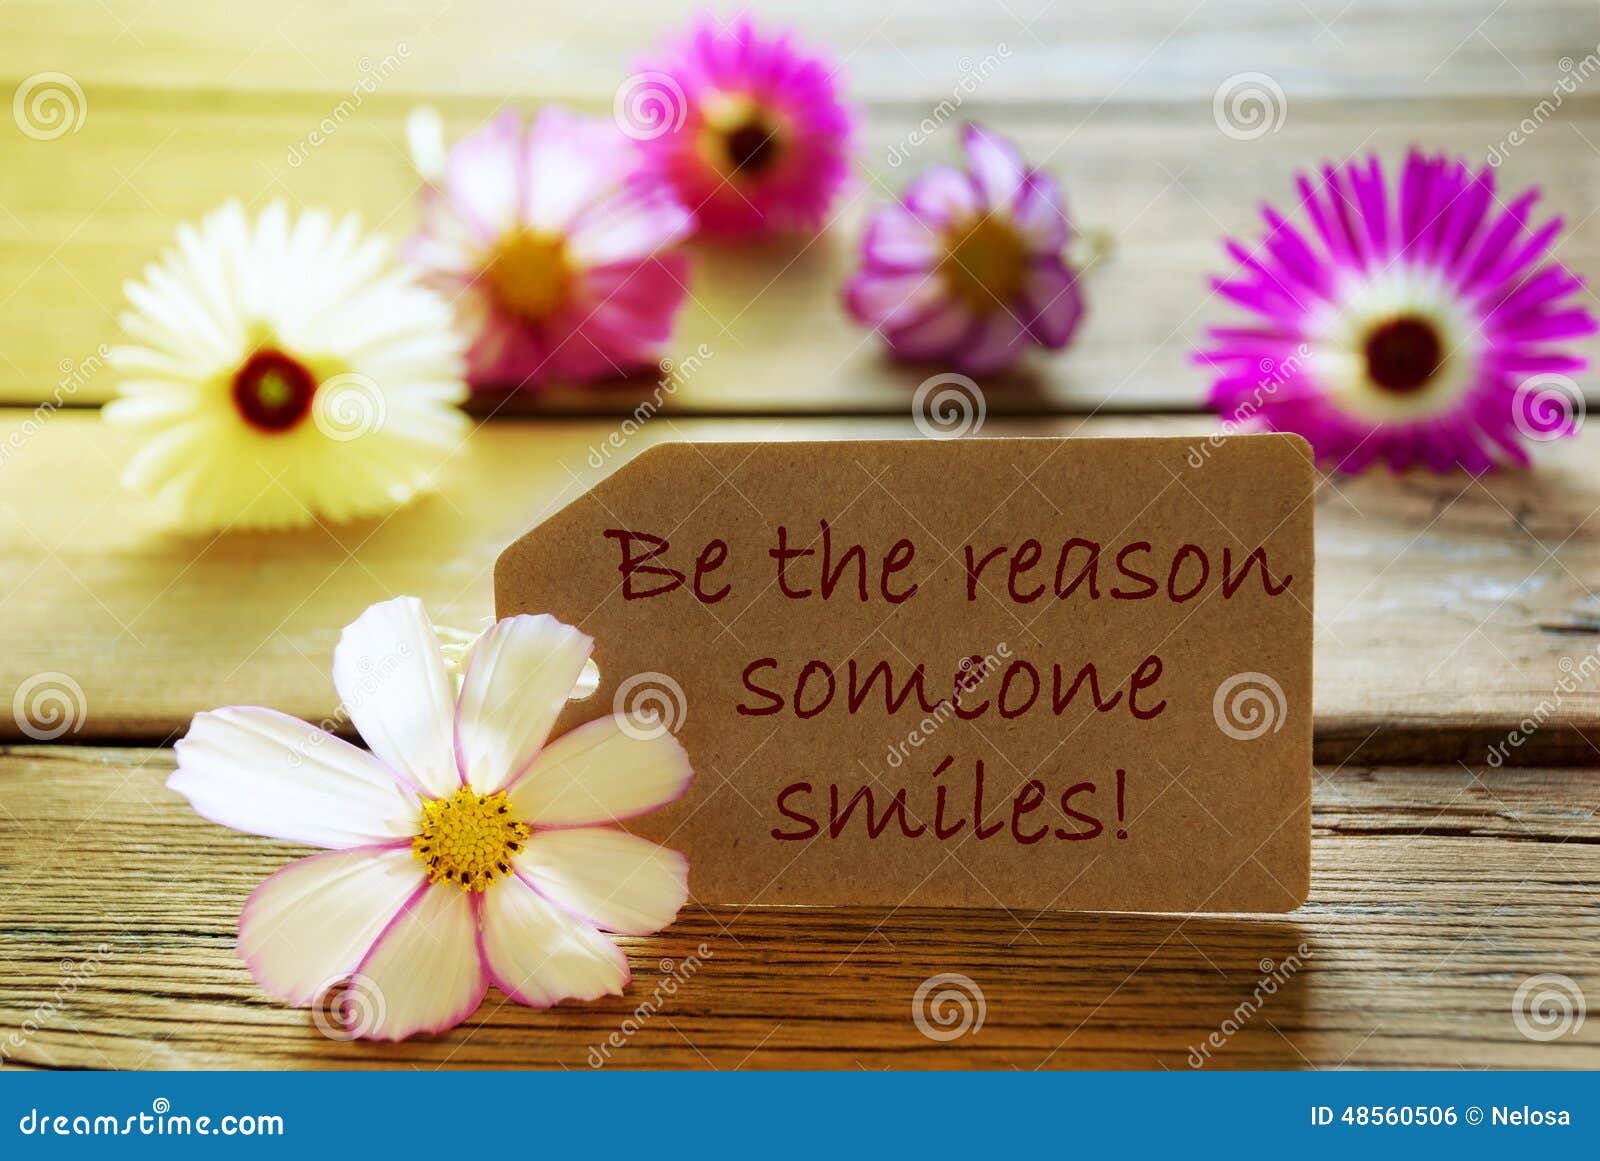 sunny label with life quote be the reason someone smiles with cosmea blossoms